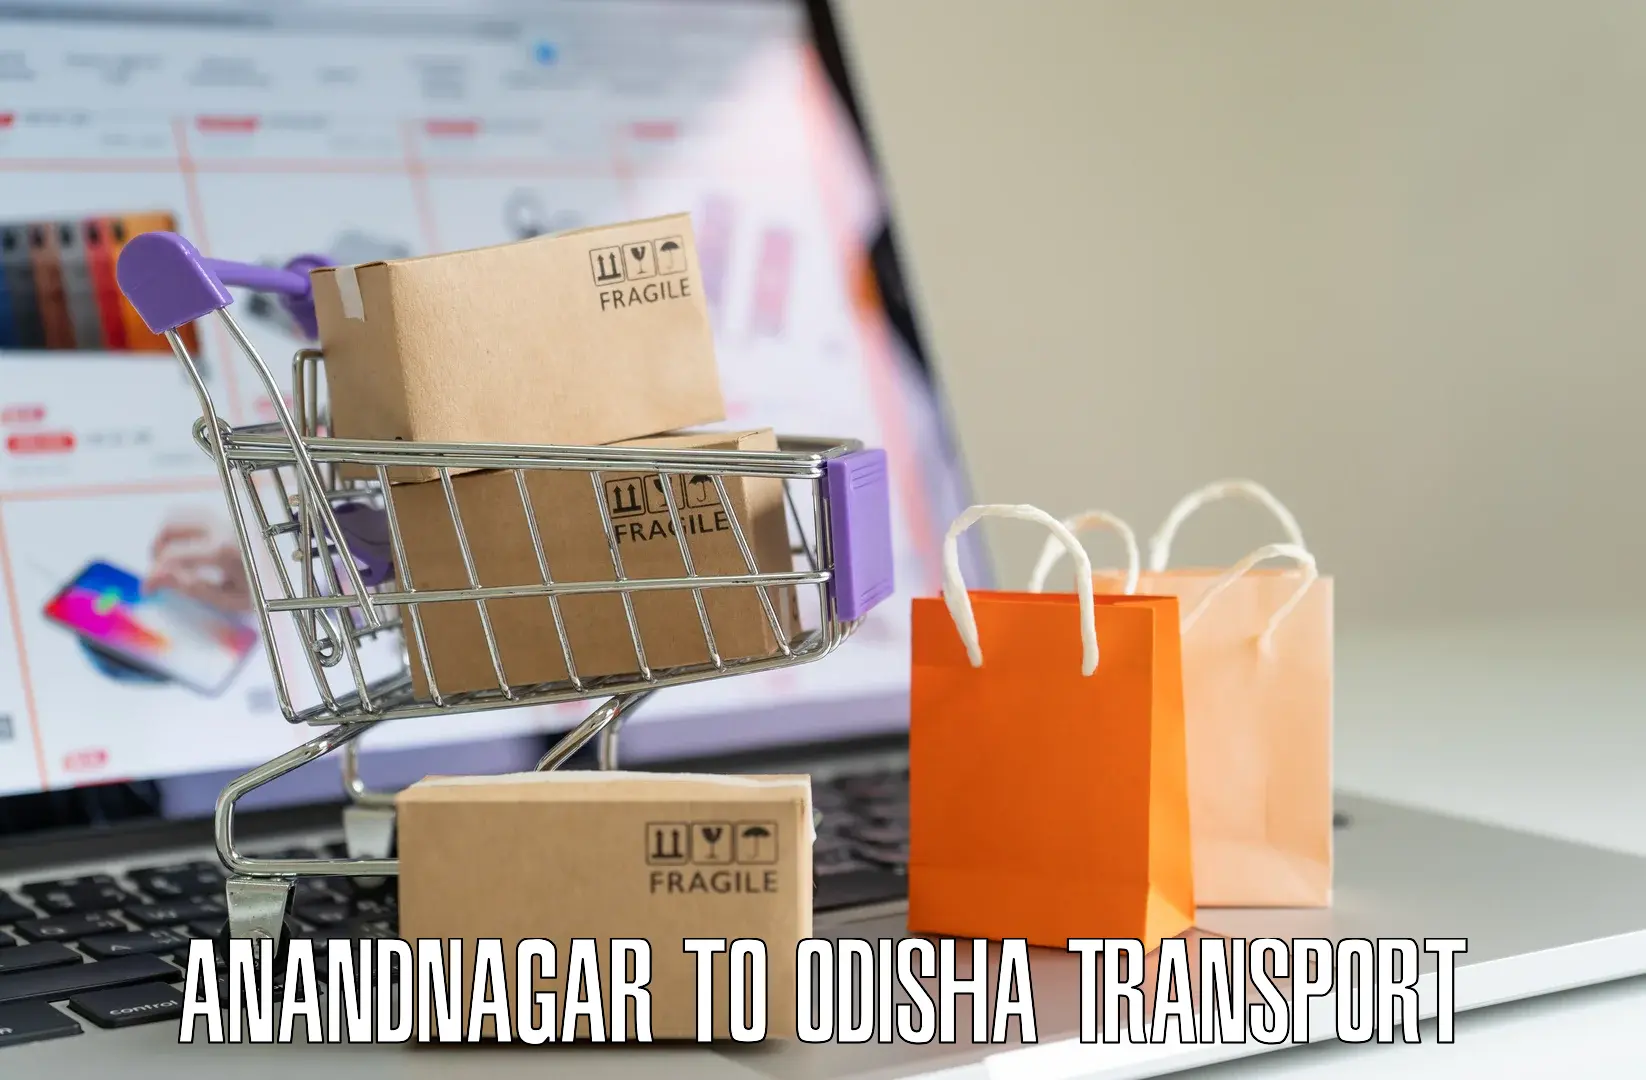 Daily parcel service transport Anandnagar to Angul